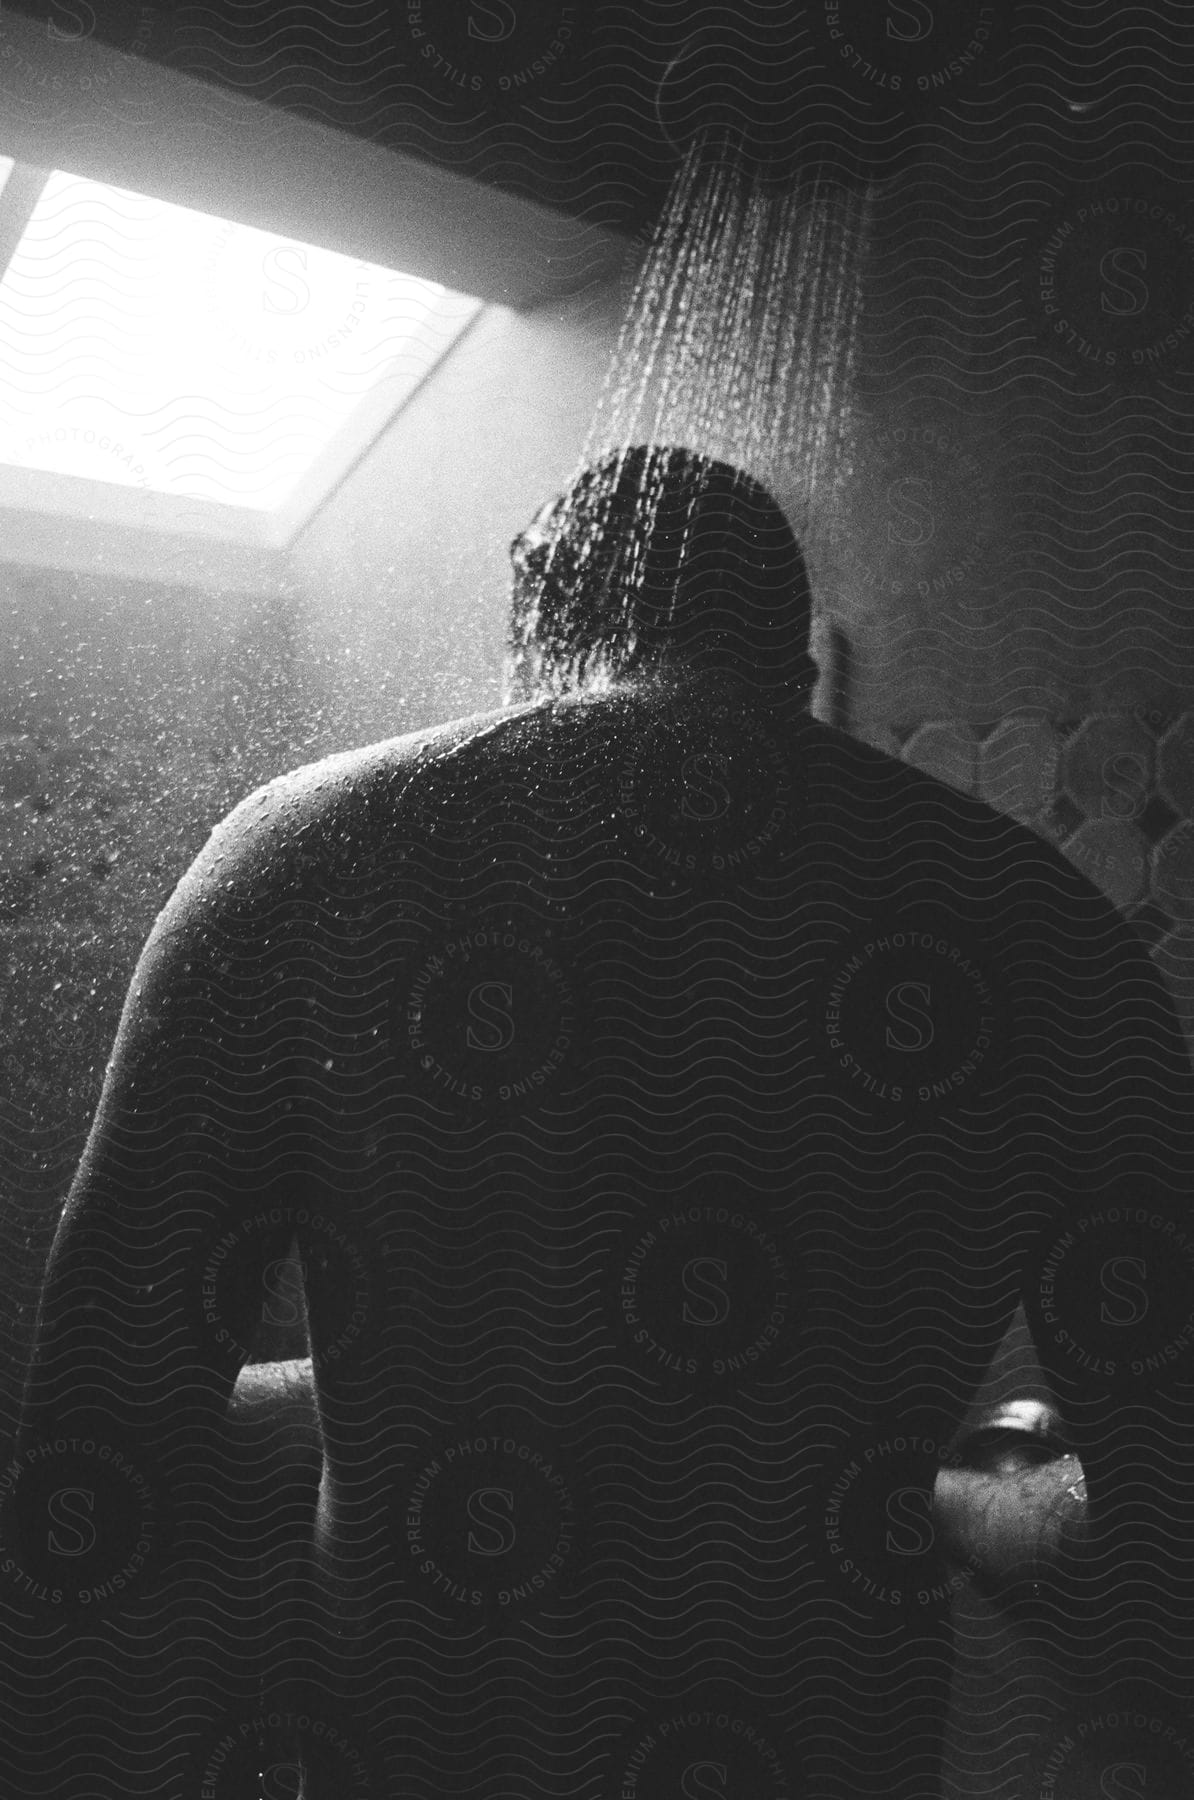 A person in a bathroom shower